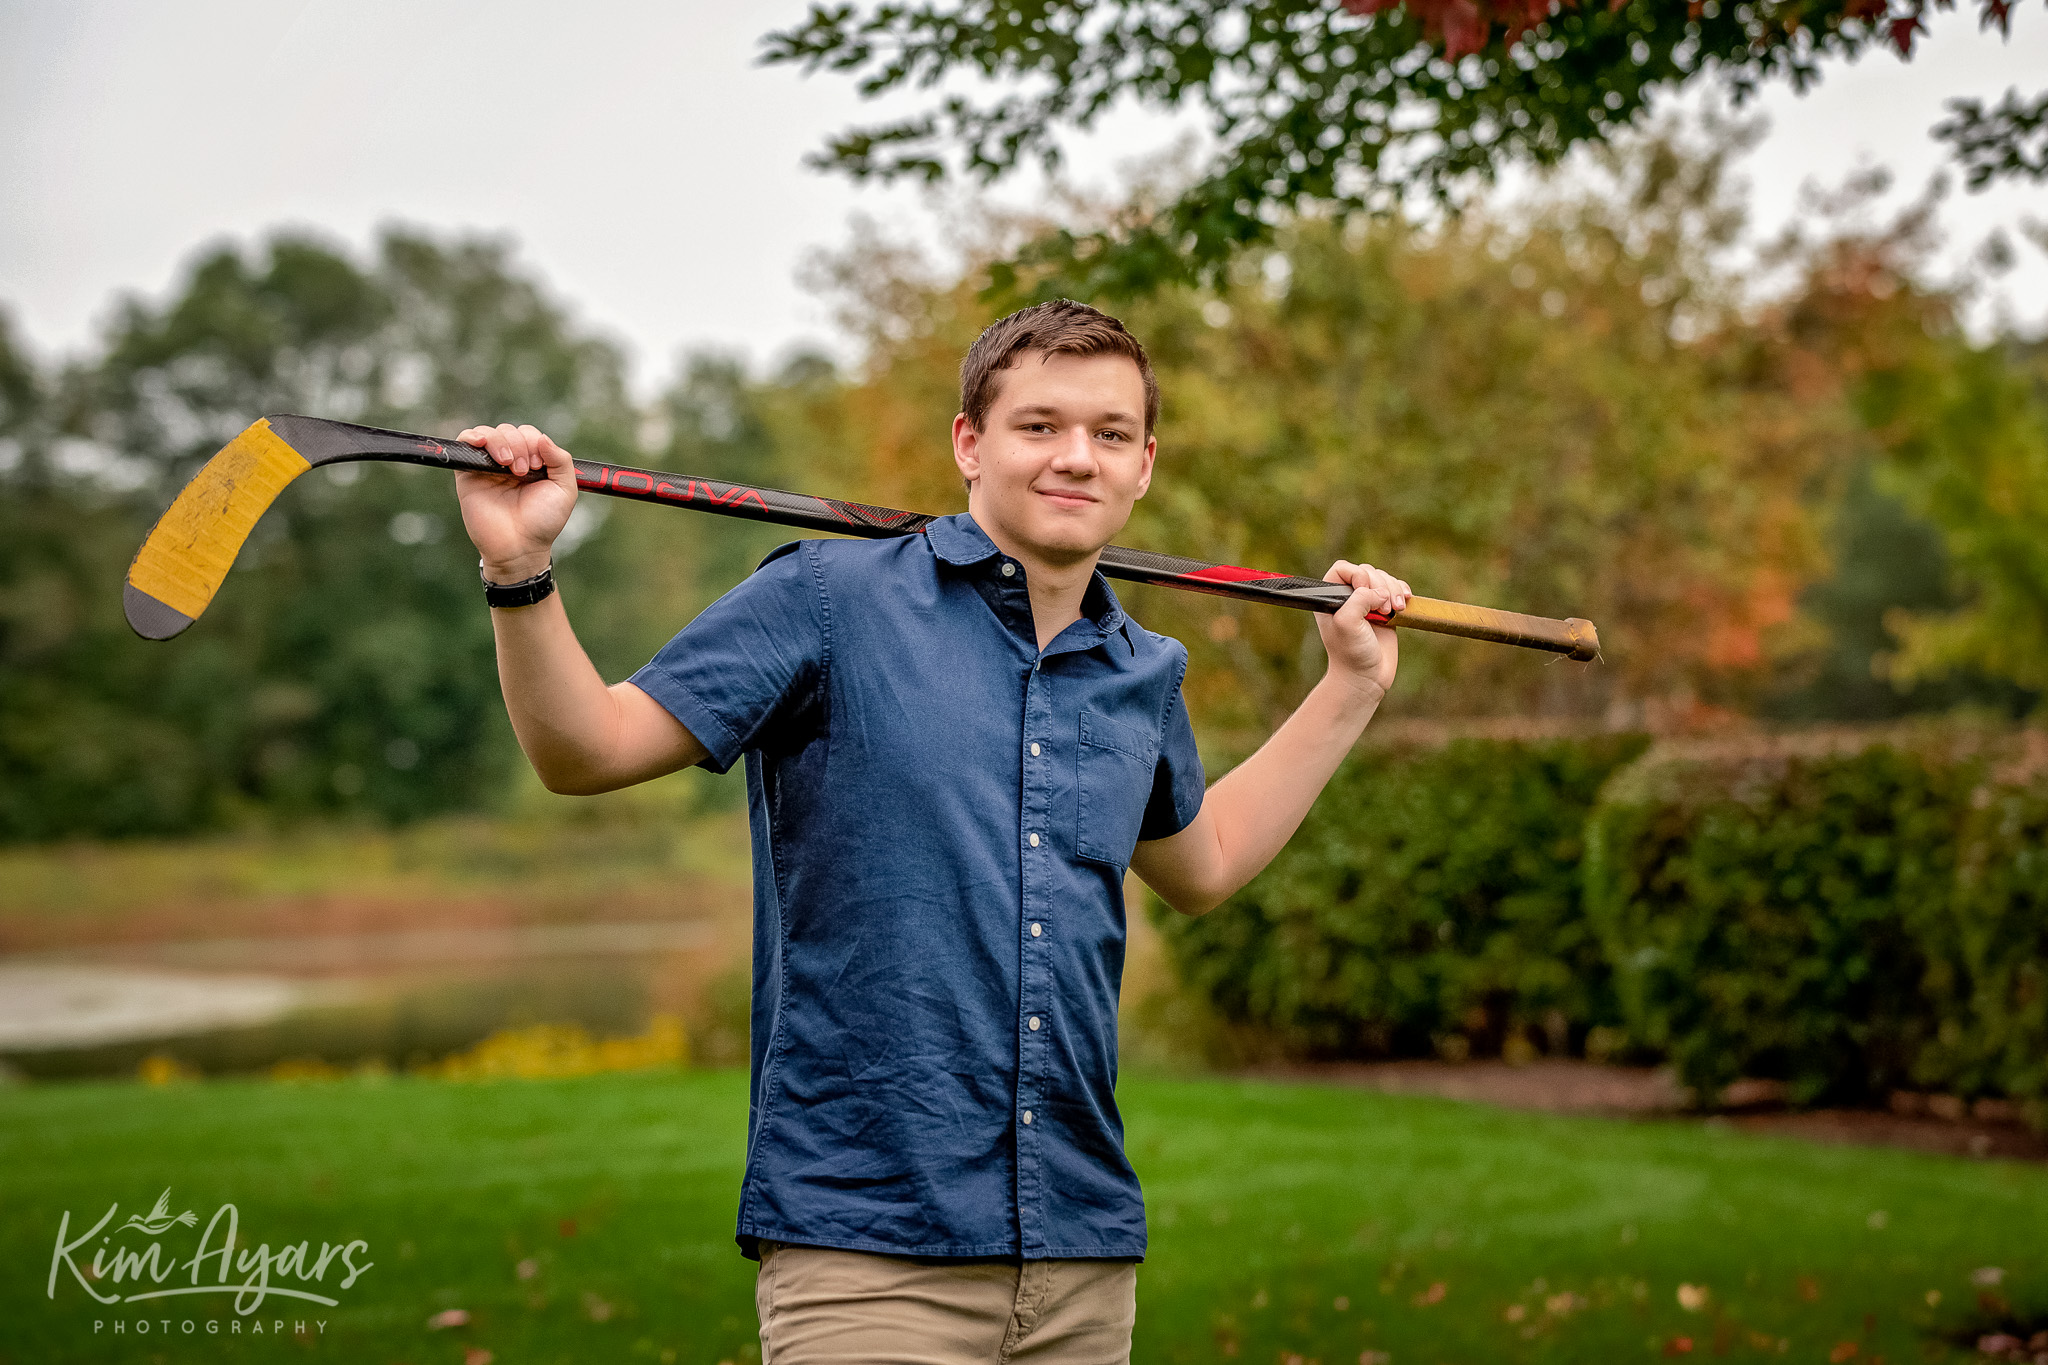 A high school senior is holding a hockey stick and smiling at the camera.